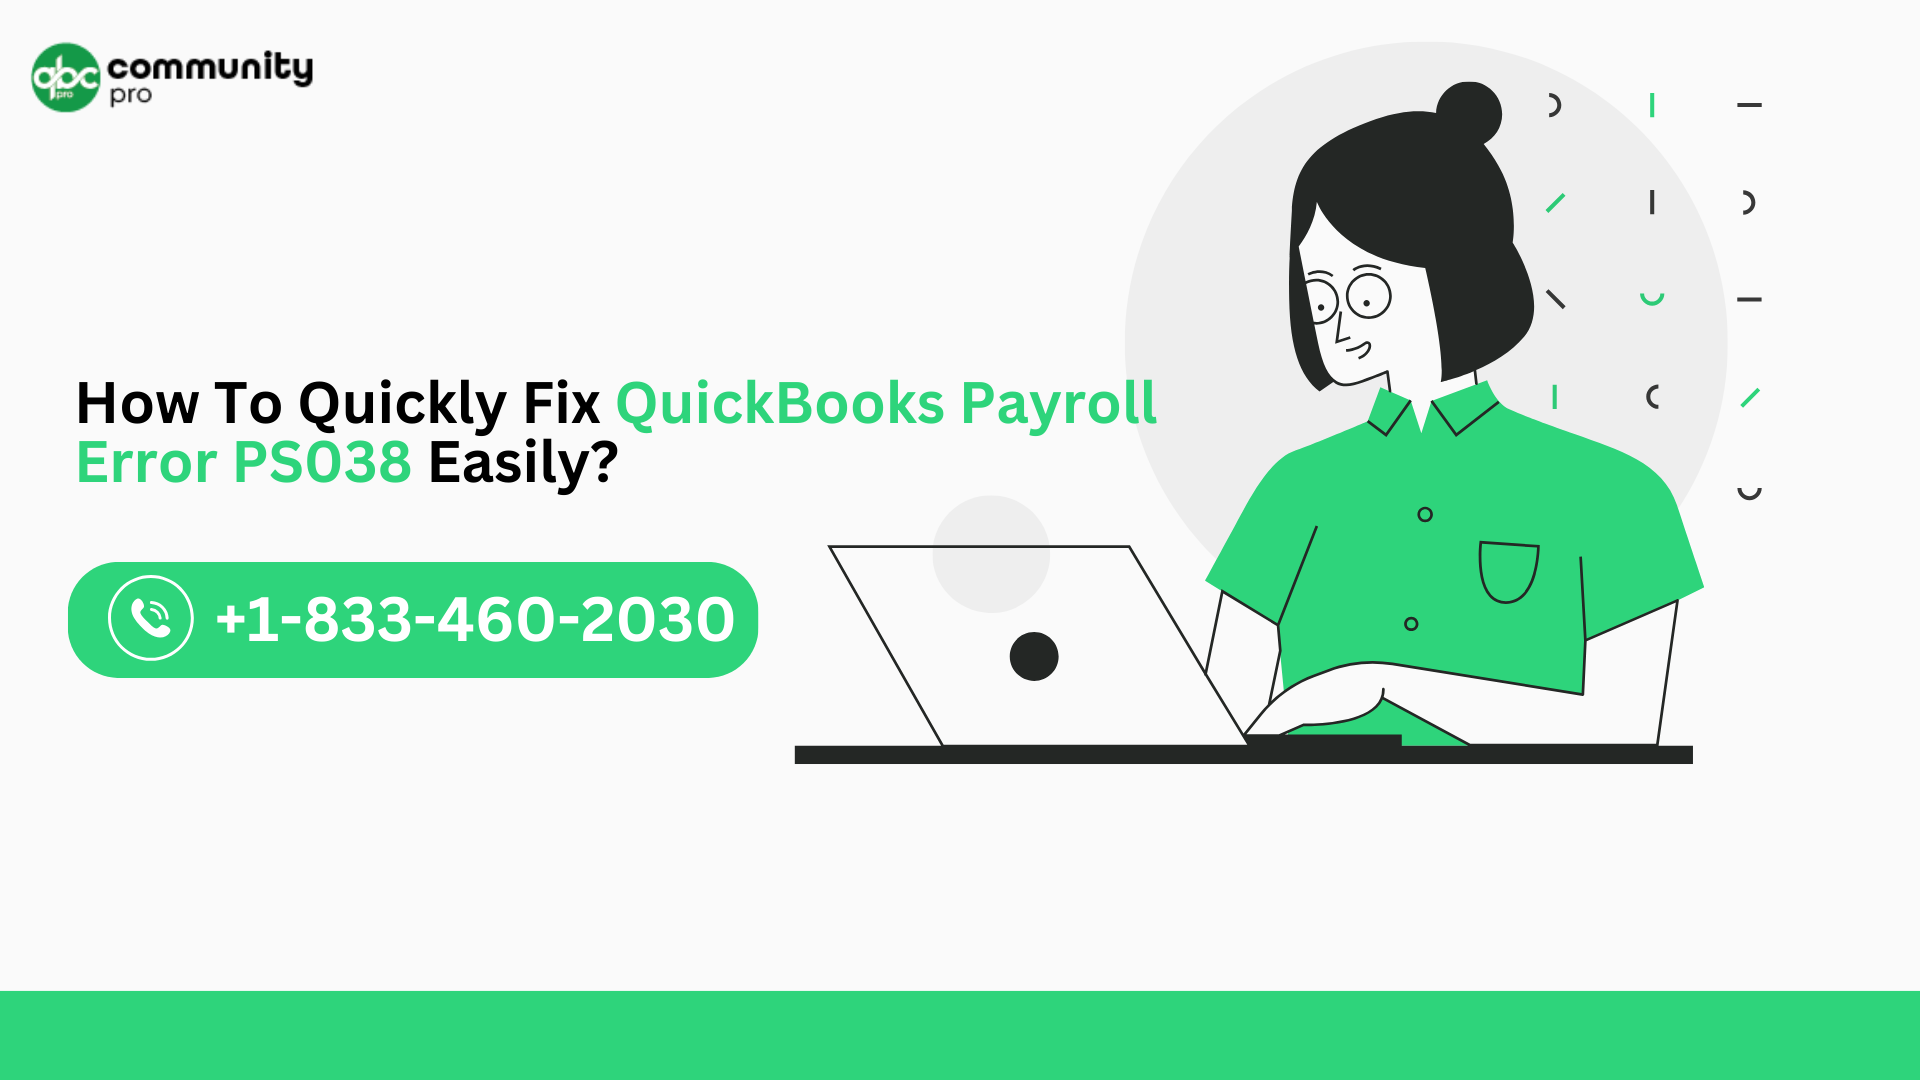 How To Quickly Fix QuickBooks Payroll Error PS038 Easily? - Networkblogworld.com